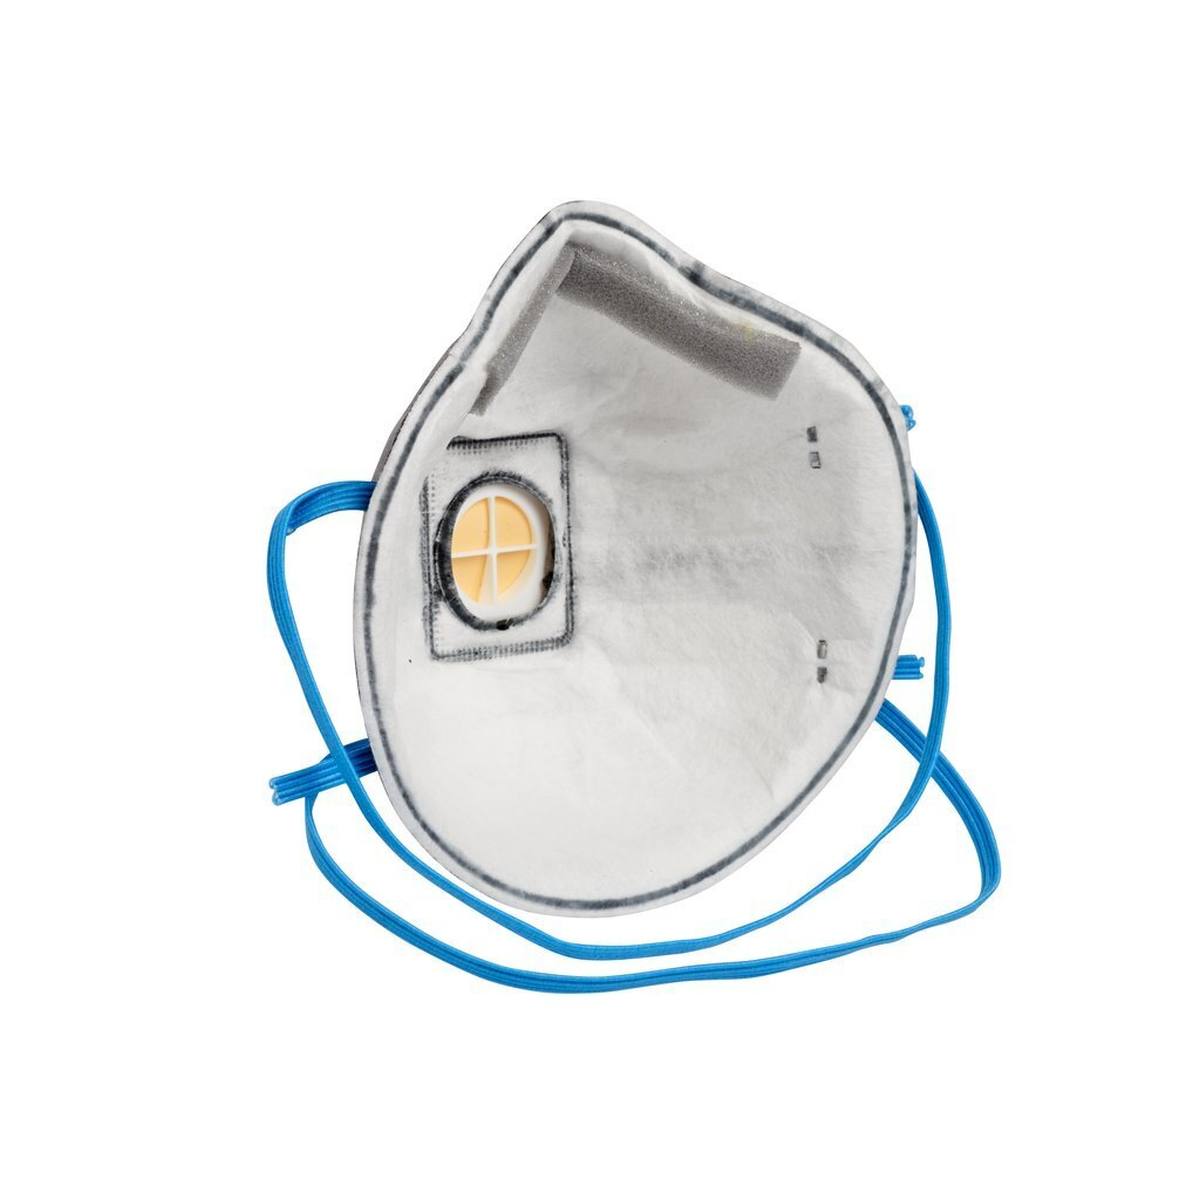 3M 9922 FFP2 odor protection mask with cool-flow exhalation valve, against solid particles and liquid, non-volatile aerosols, up to 10 times the MAK value for ozone and against unpleasant organic odors (below MAK)